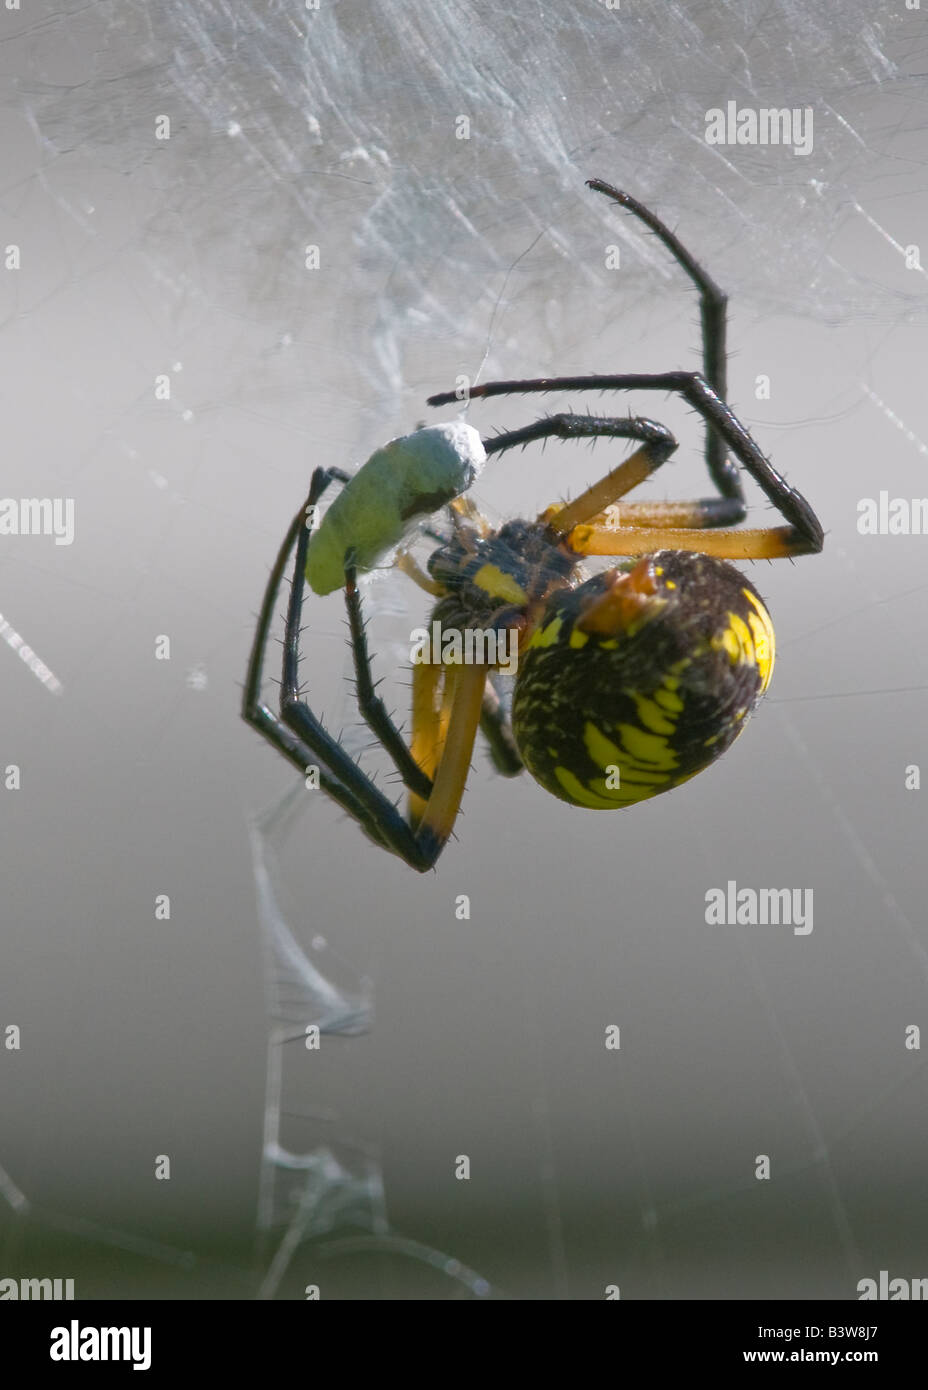 A yellow garden spider wrapping a meal. Stock Photo